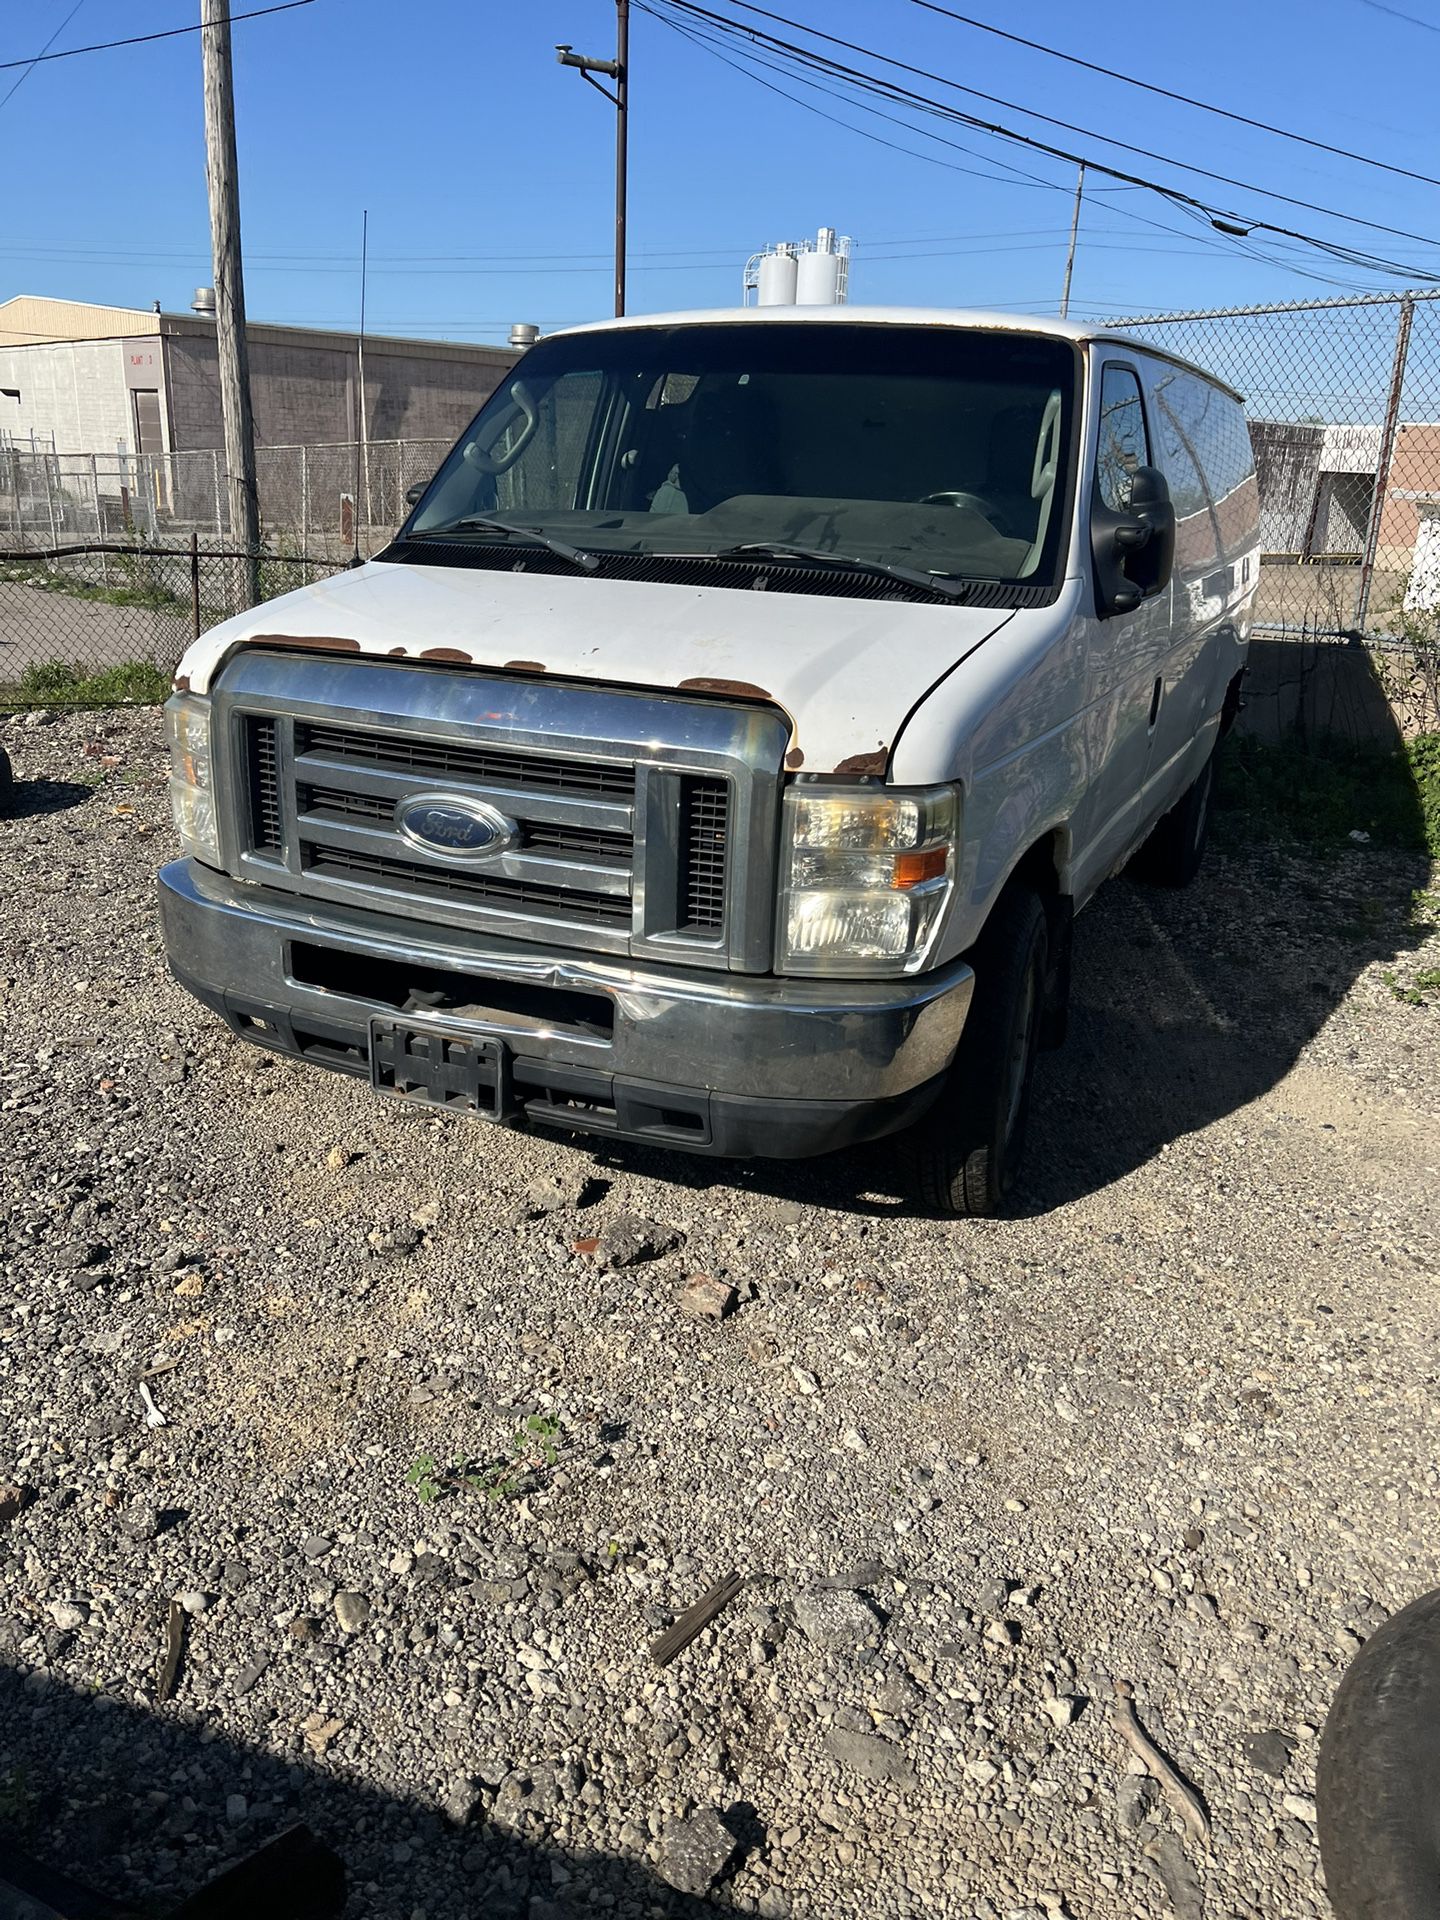 2009 ford E250 parts For Sale 